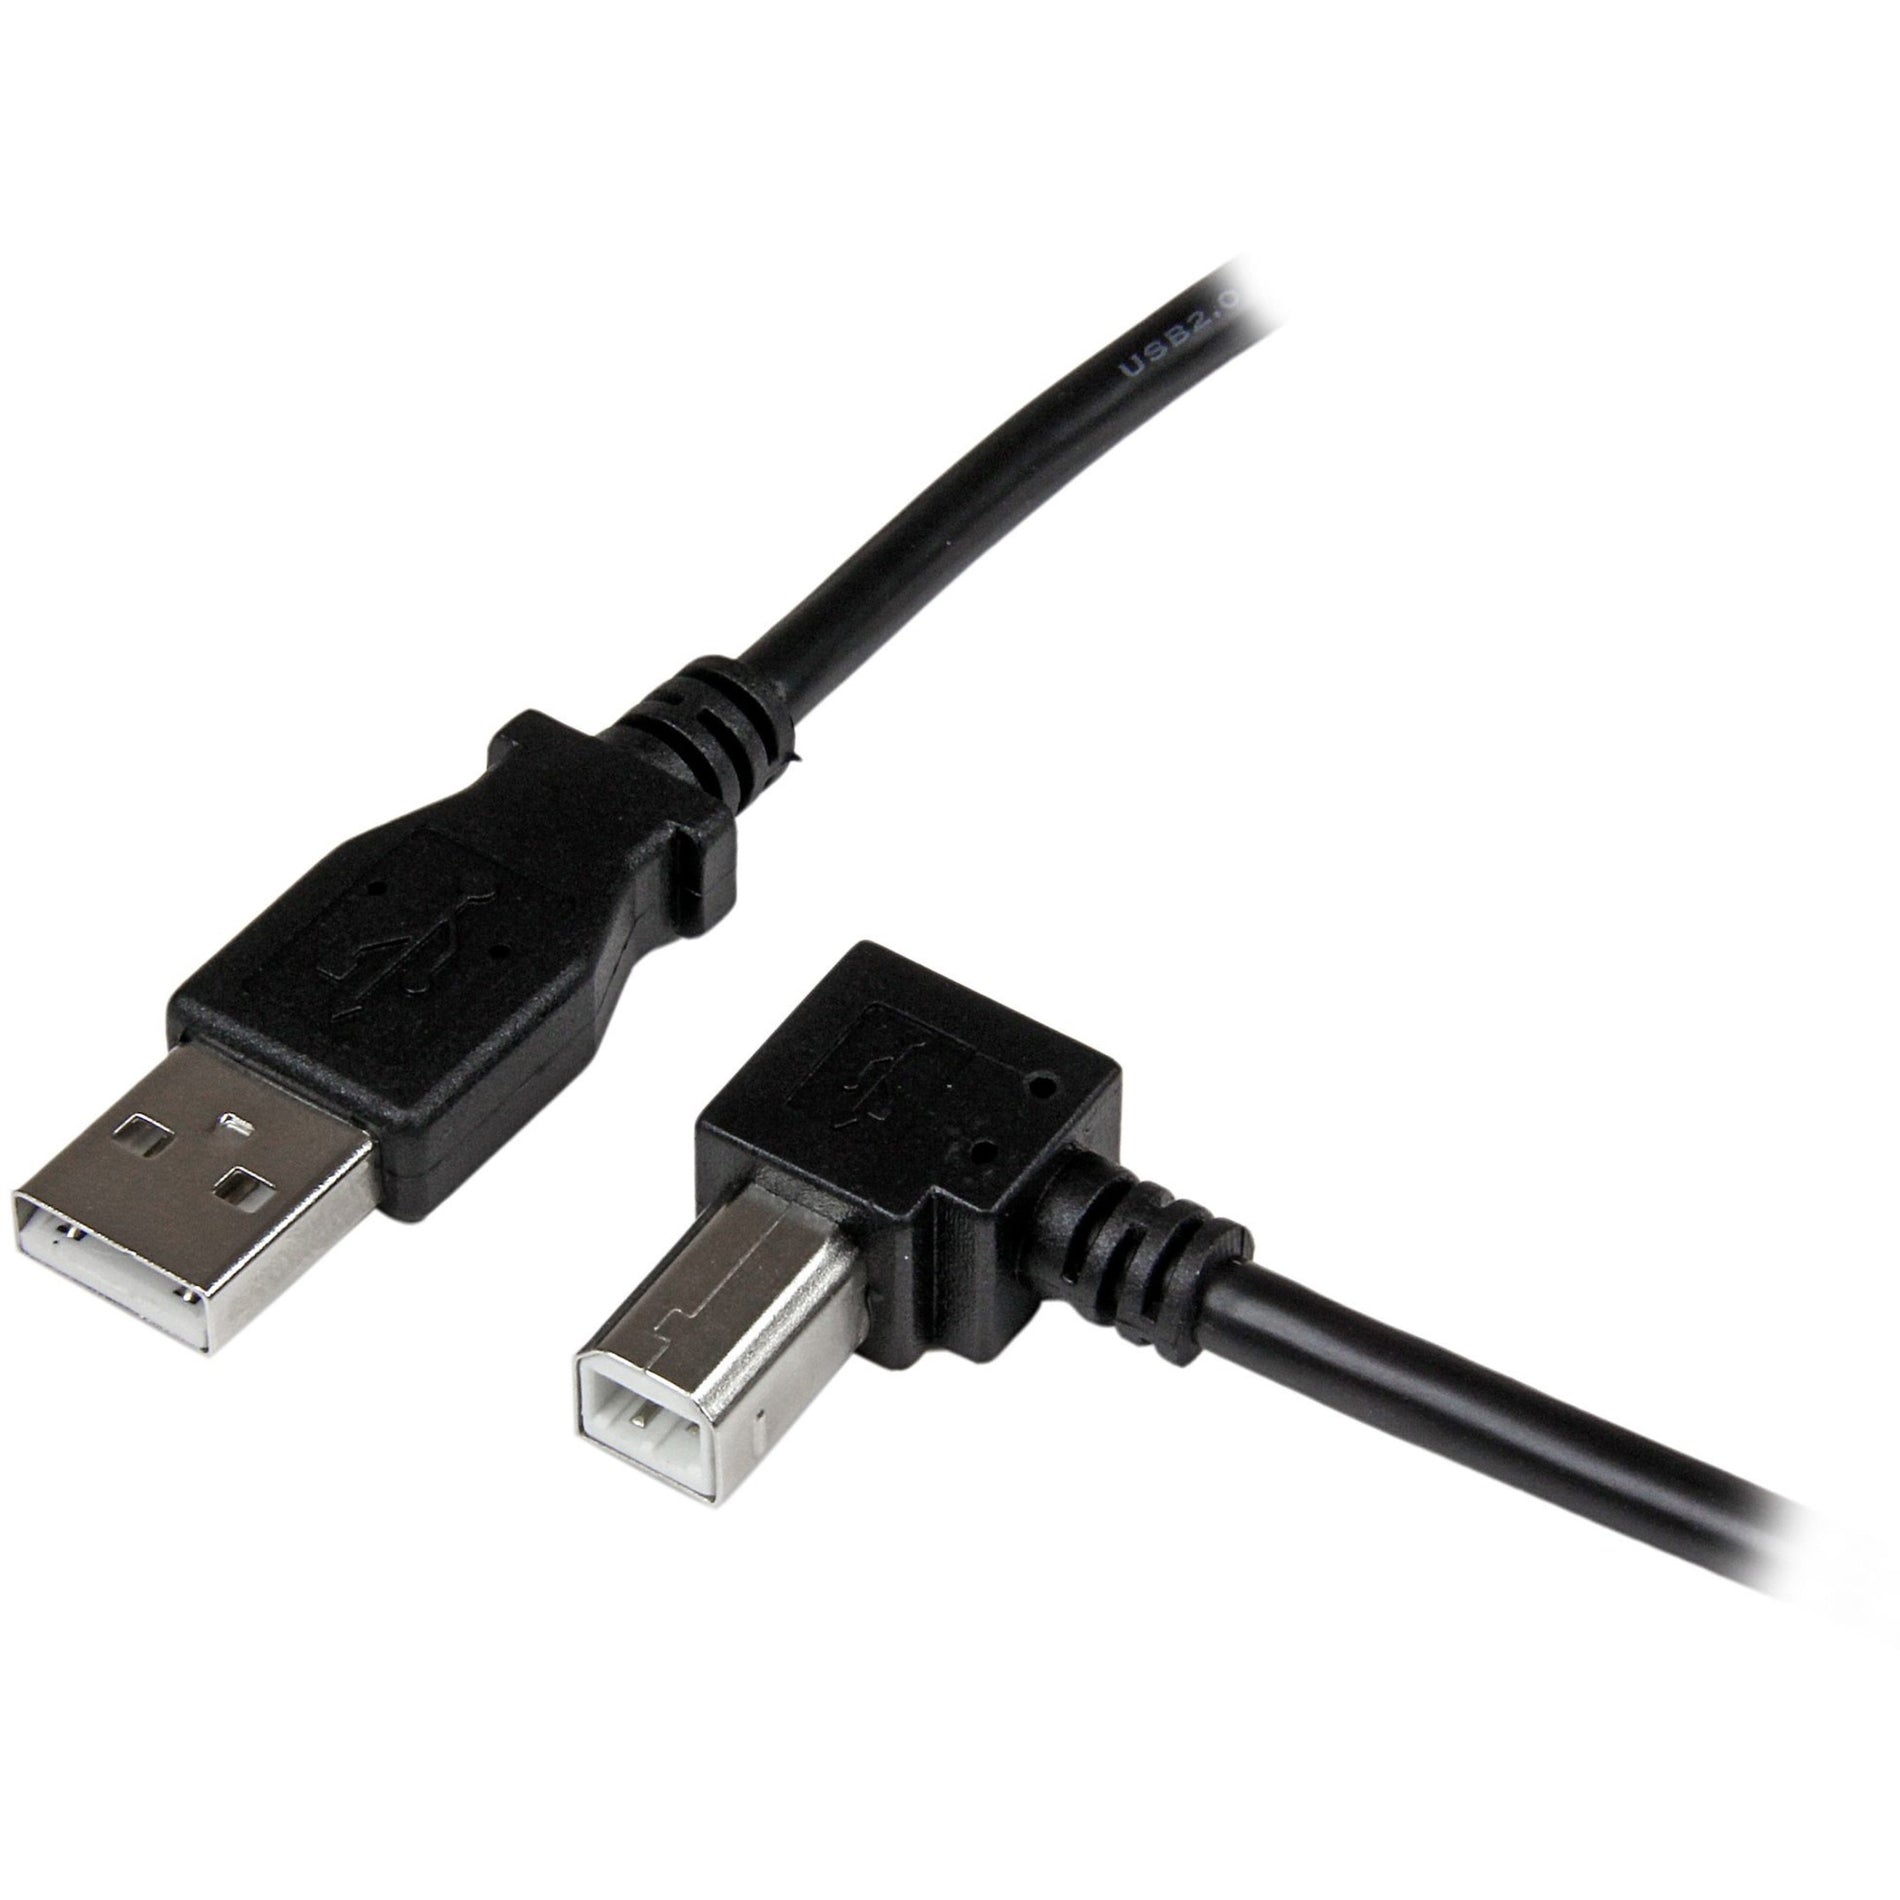 StarTech.com USBAB3MR 3m USB 2.0 A to Right Angle B Cable - M/M, 9.84 ft Data Transfer Cable